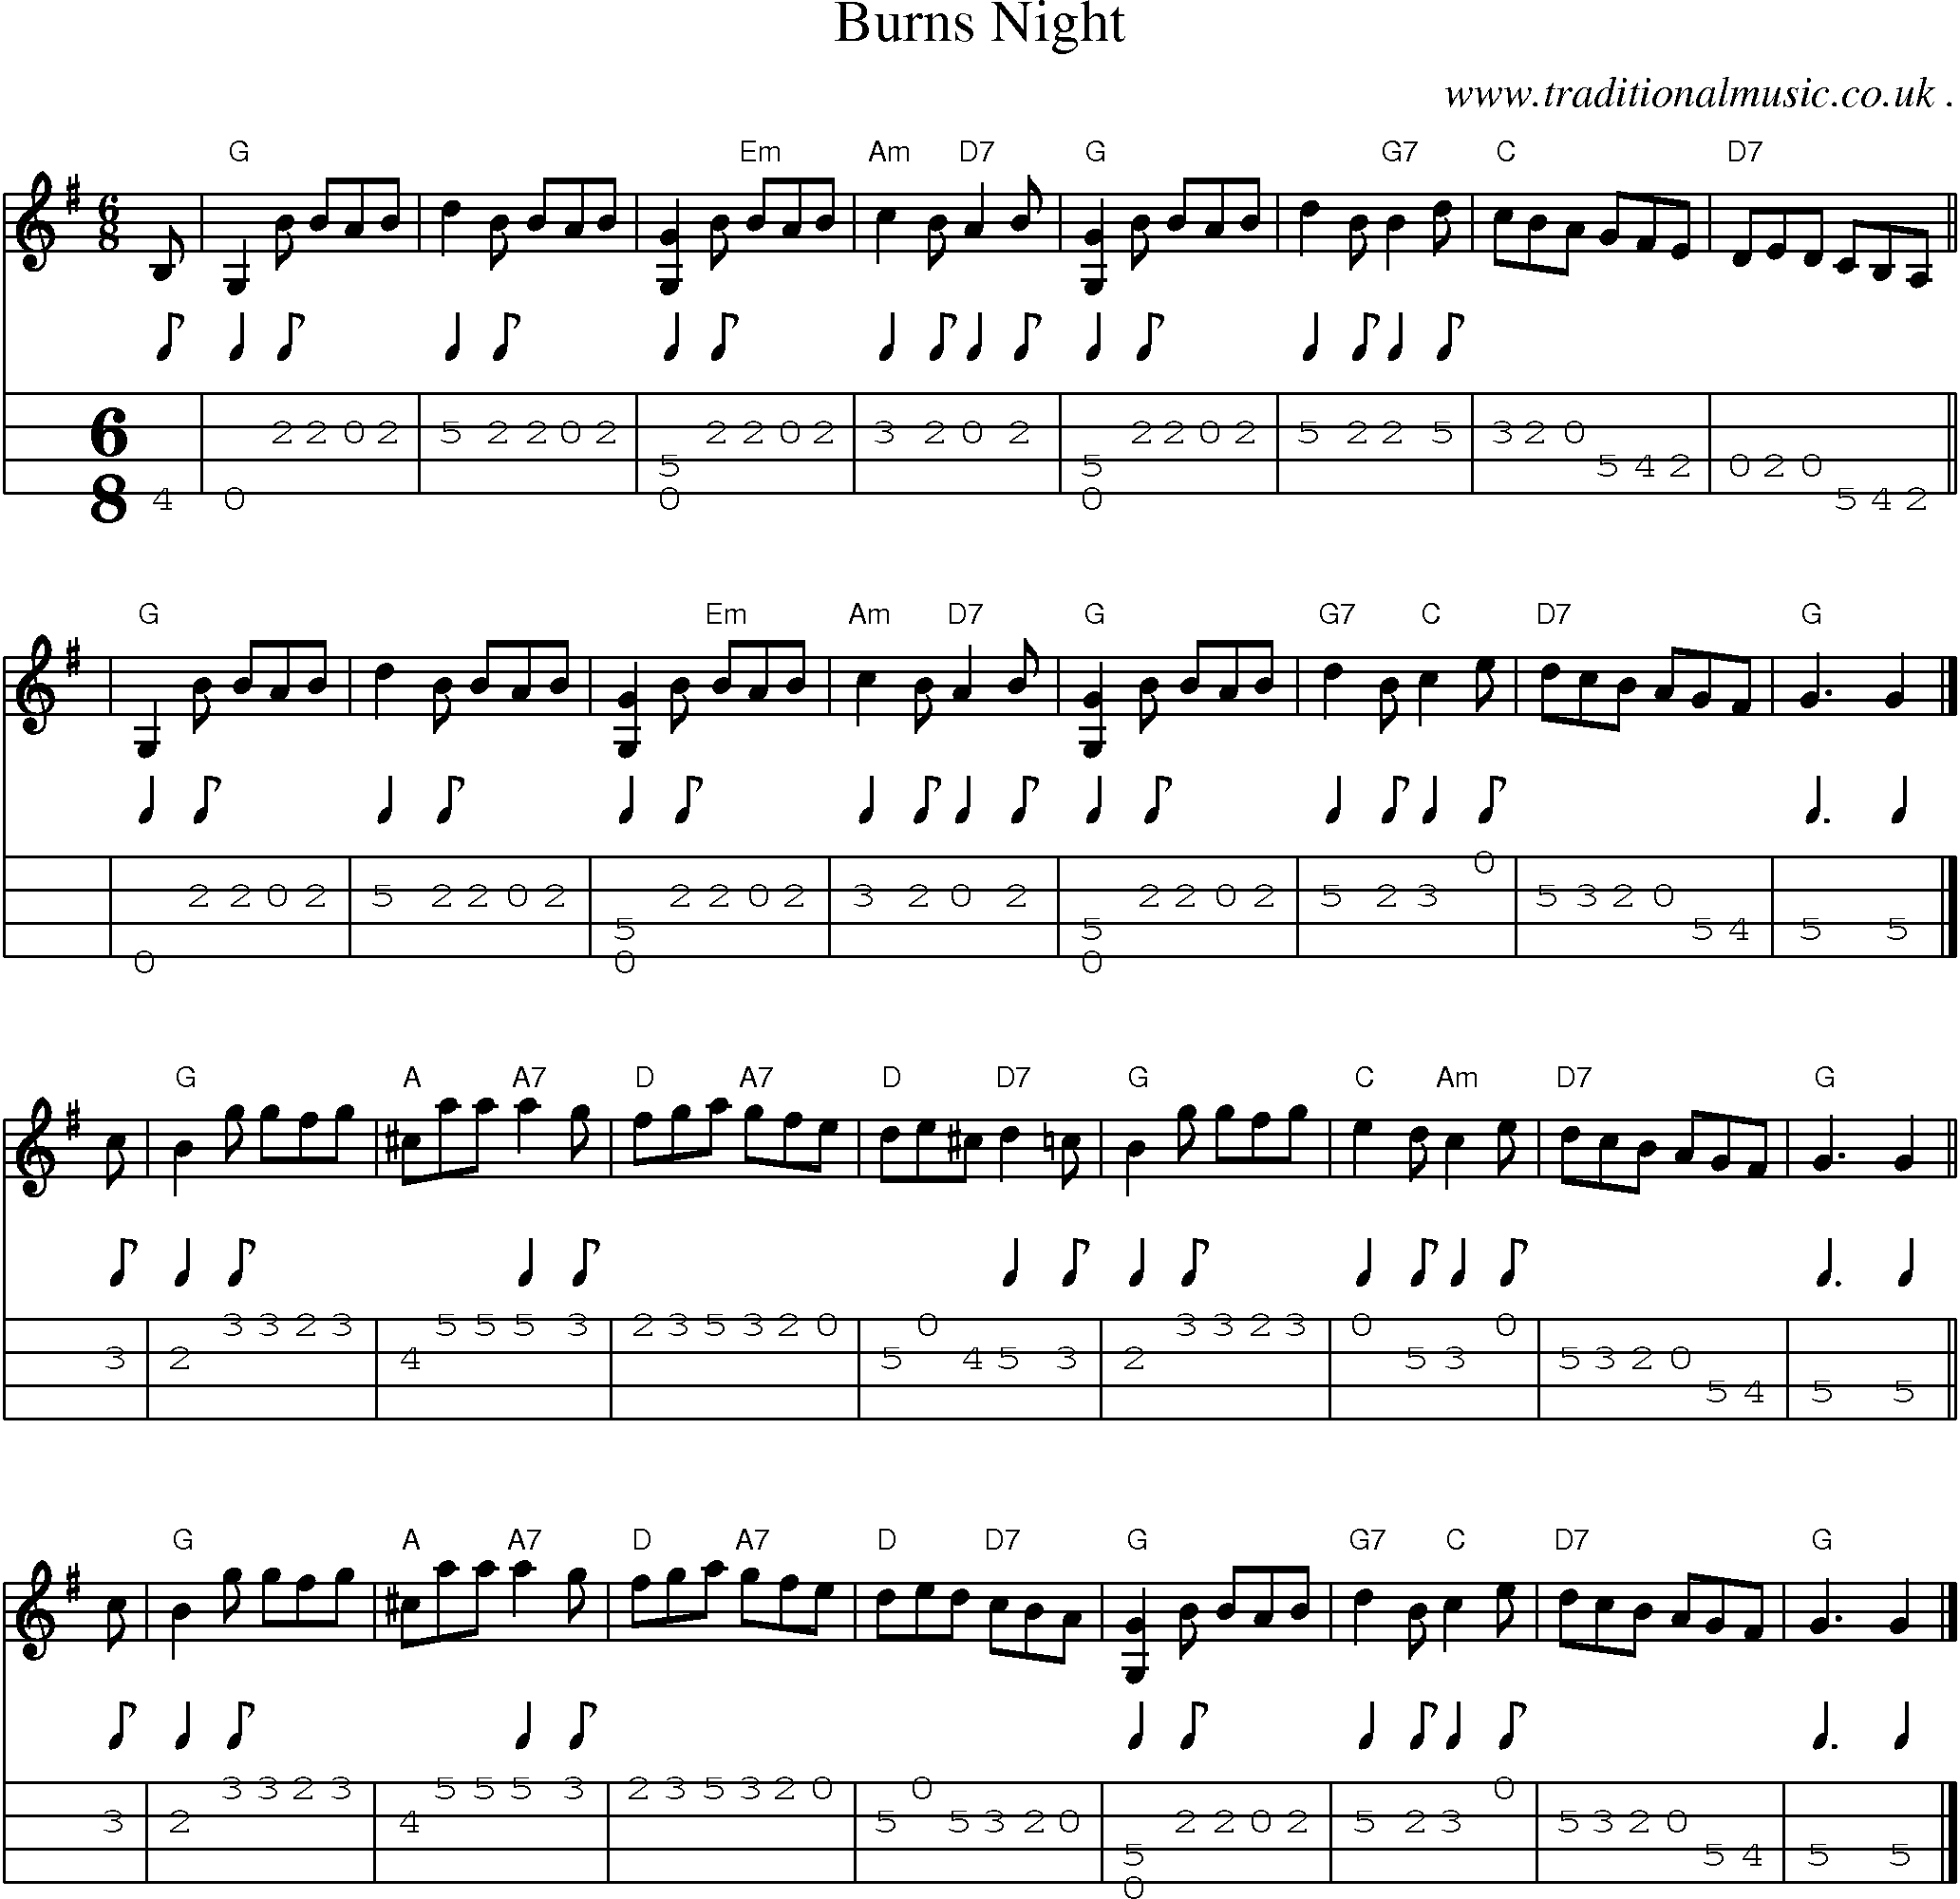 Sheet-music  score, Chords and Mandolin Tabs for Burns Night